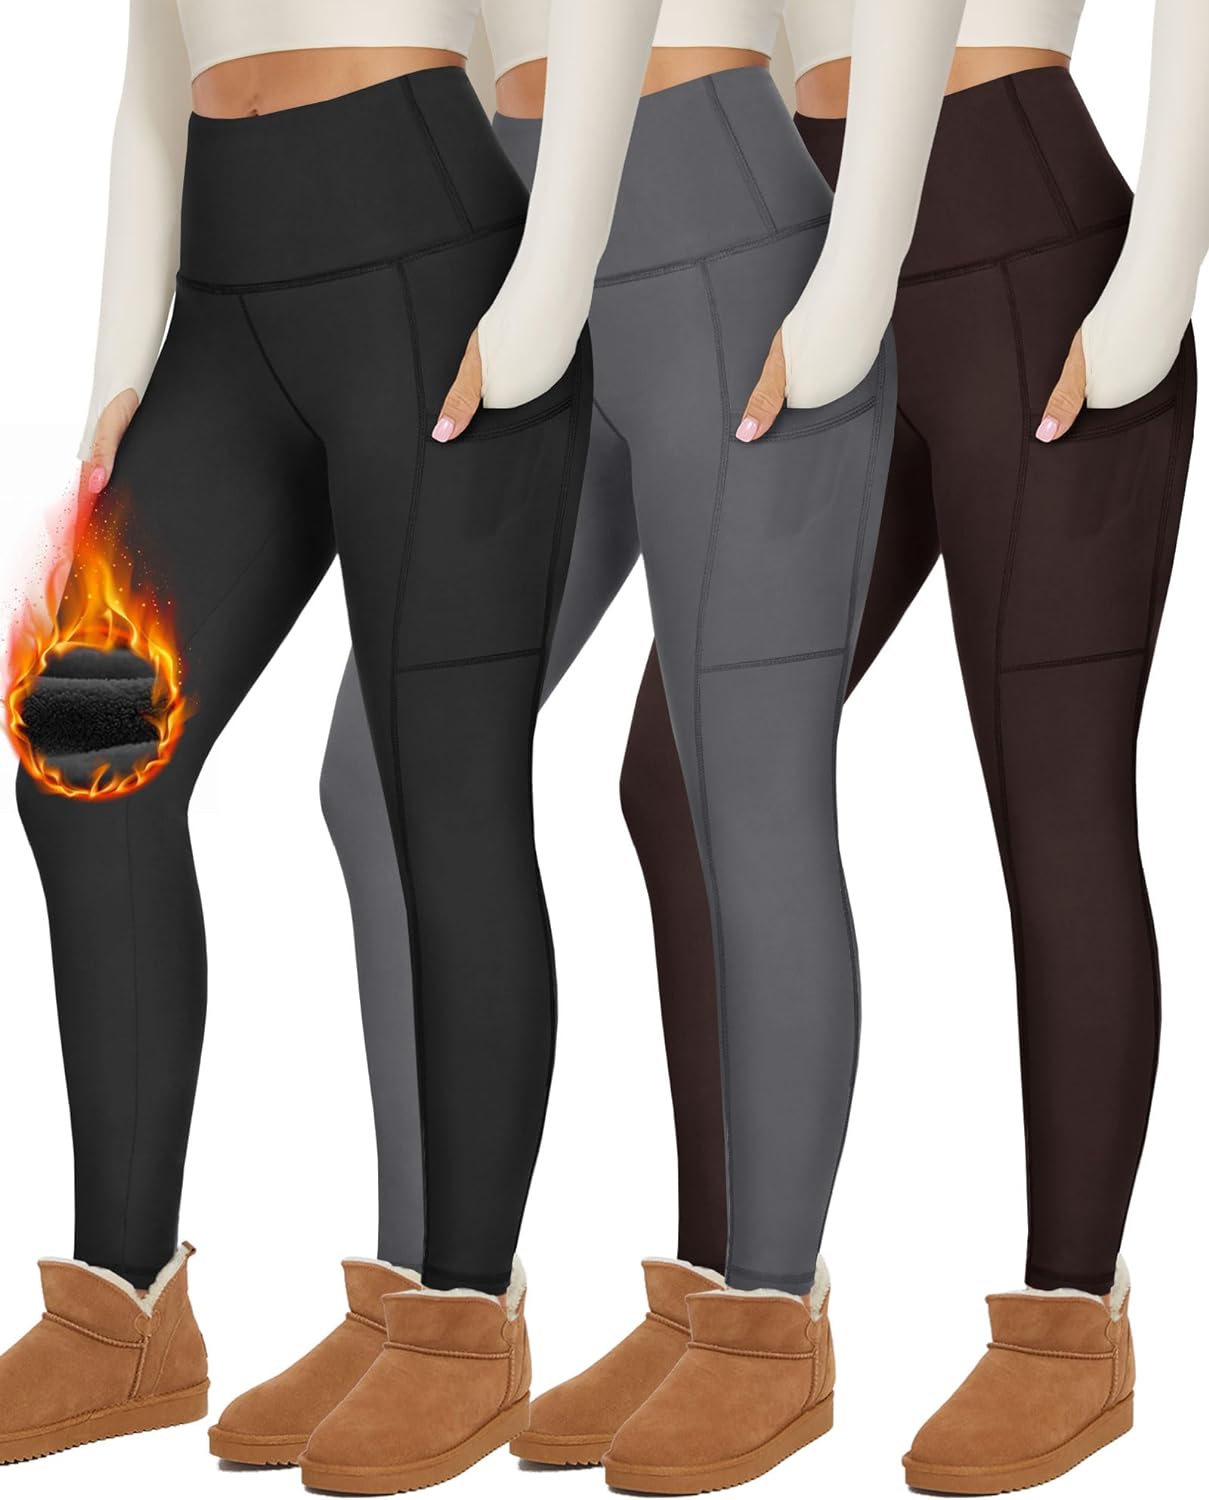 UBCUTE 3 Pack Thick Fleece Lined Leggings with Pockets for Women - High Waist Winter Thermal Warm Yoga Pants for Hiking